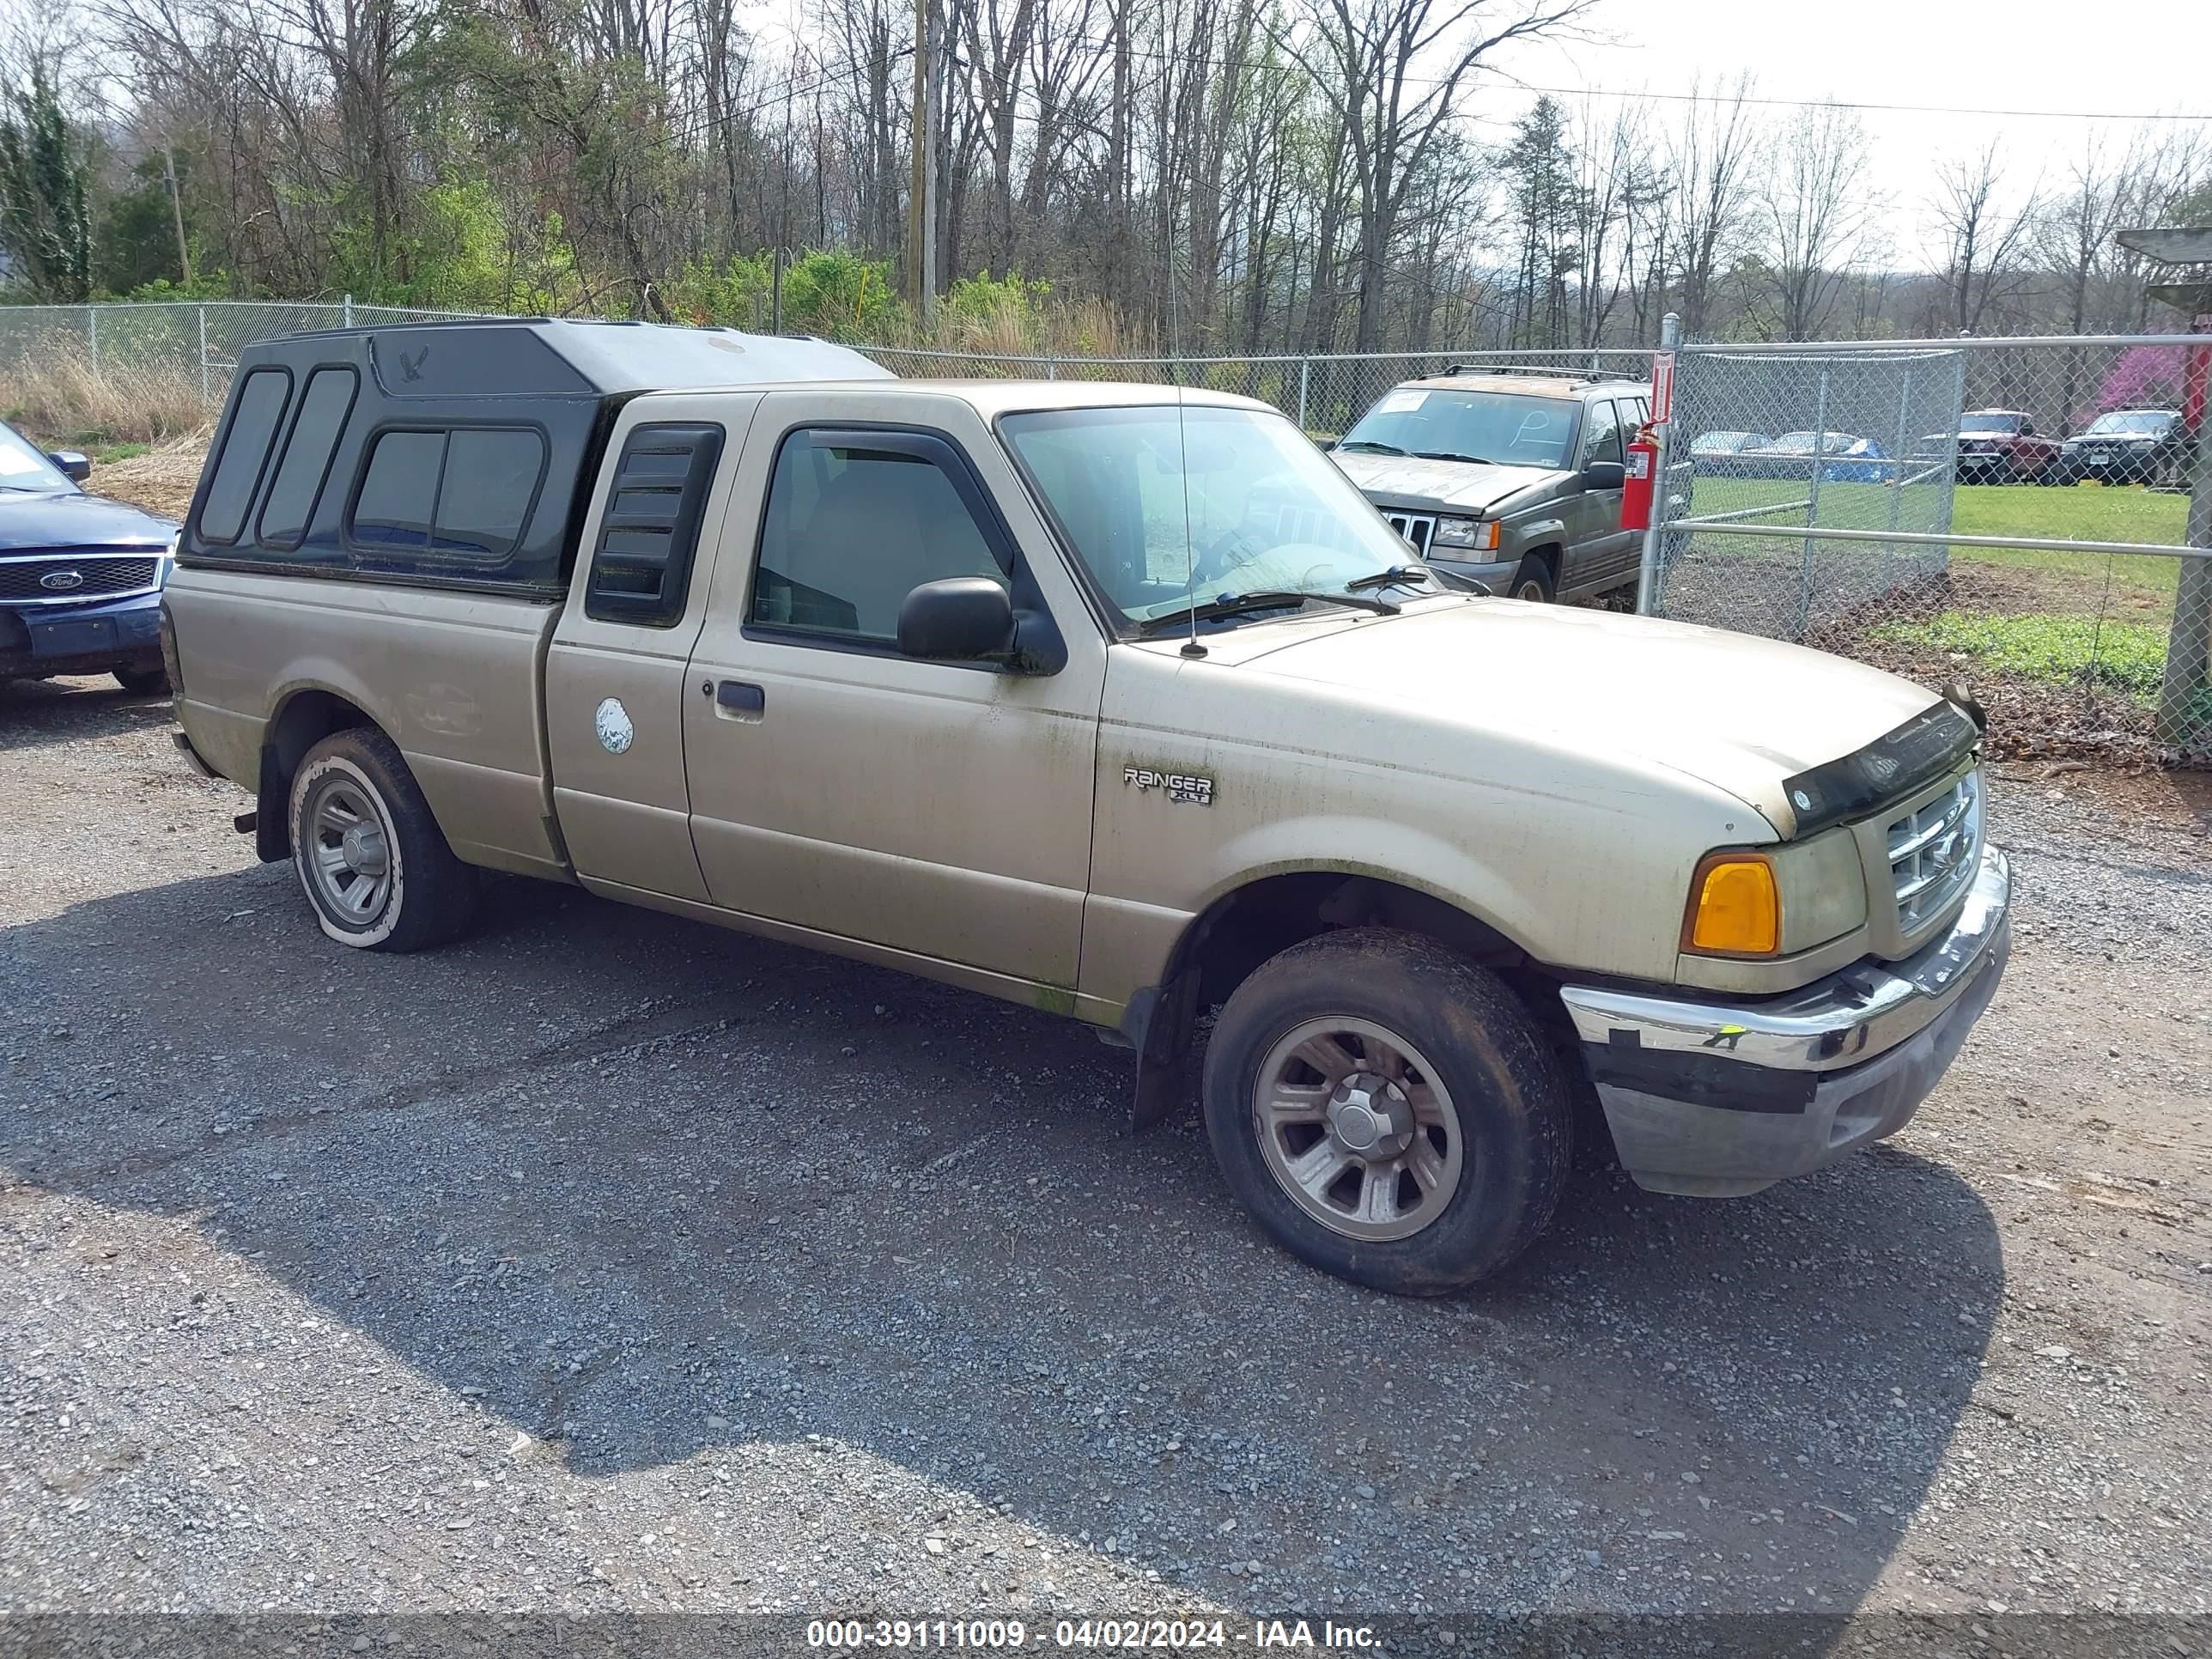 vin: 1FTYR14U71PA34330 1FTYR14U71PA34330 2001 ford ranger 3000 for Sale in 24122, 1576 Quarterwood Rd, Montvale, Virginia, USA